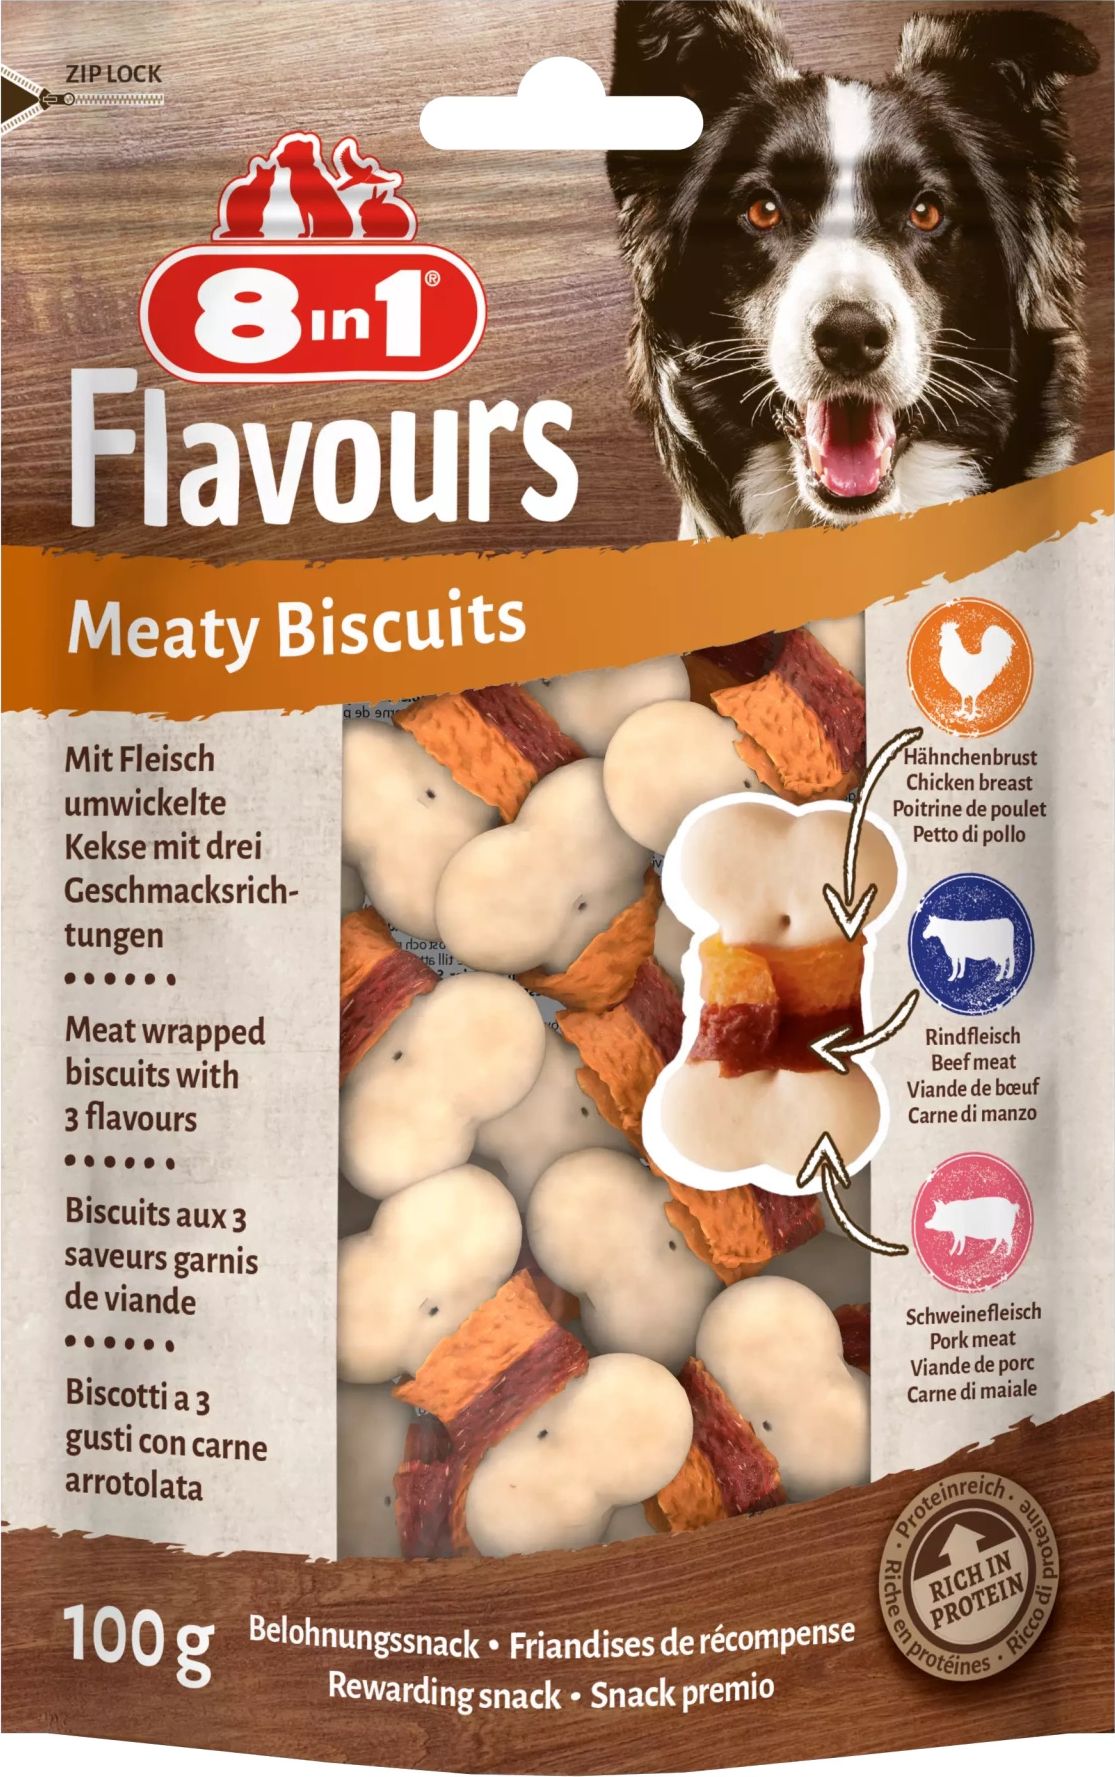 Recompense pentru caini 8in1 FLAVOURS Meaty Biscuits 100g